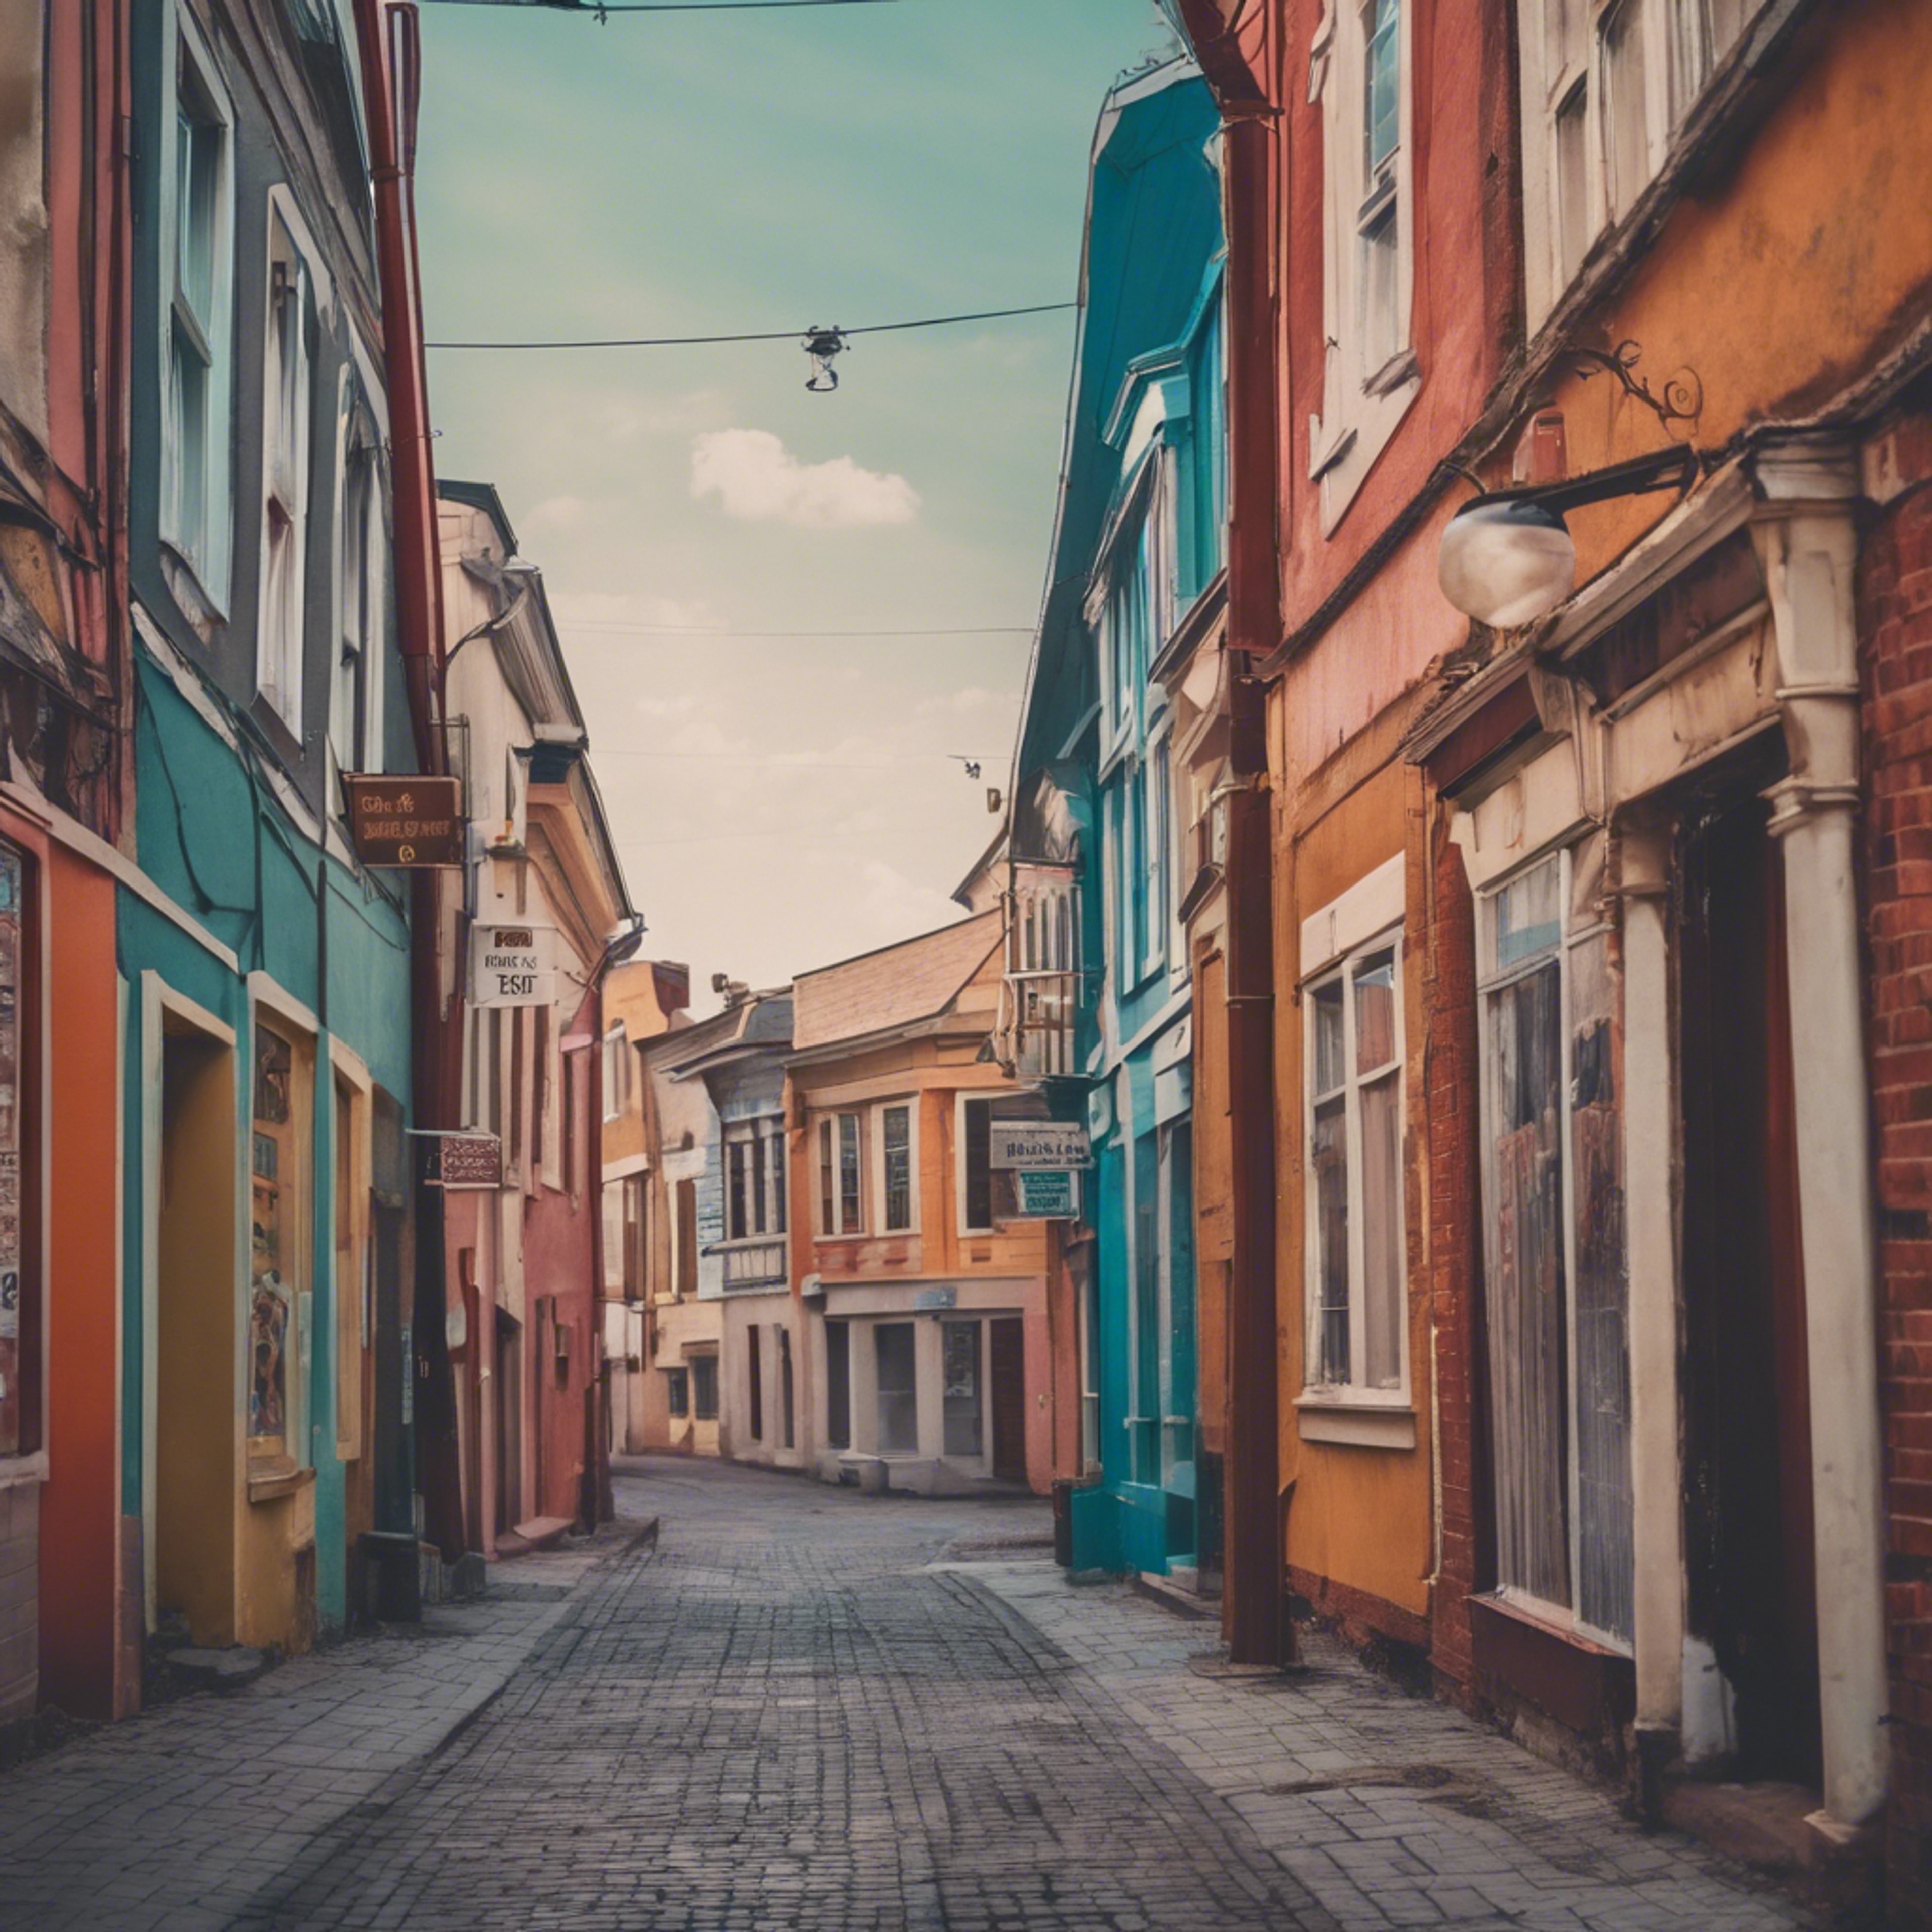 A colorful and vibrant street in a small town during the 60's with cute old-fashioned buildings. Wallpaper[8645fe0c69d8432a9196]